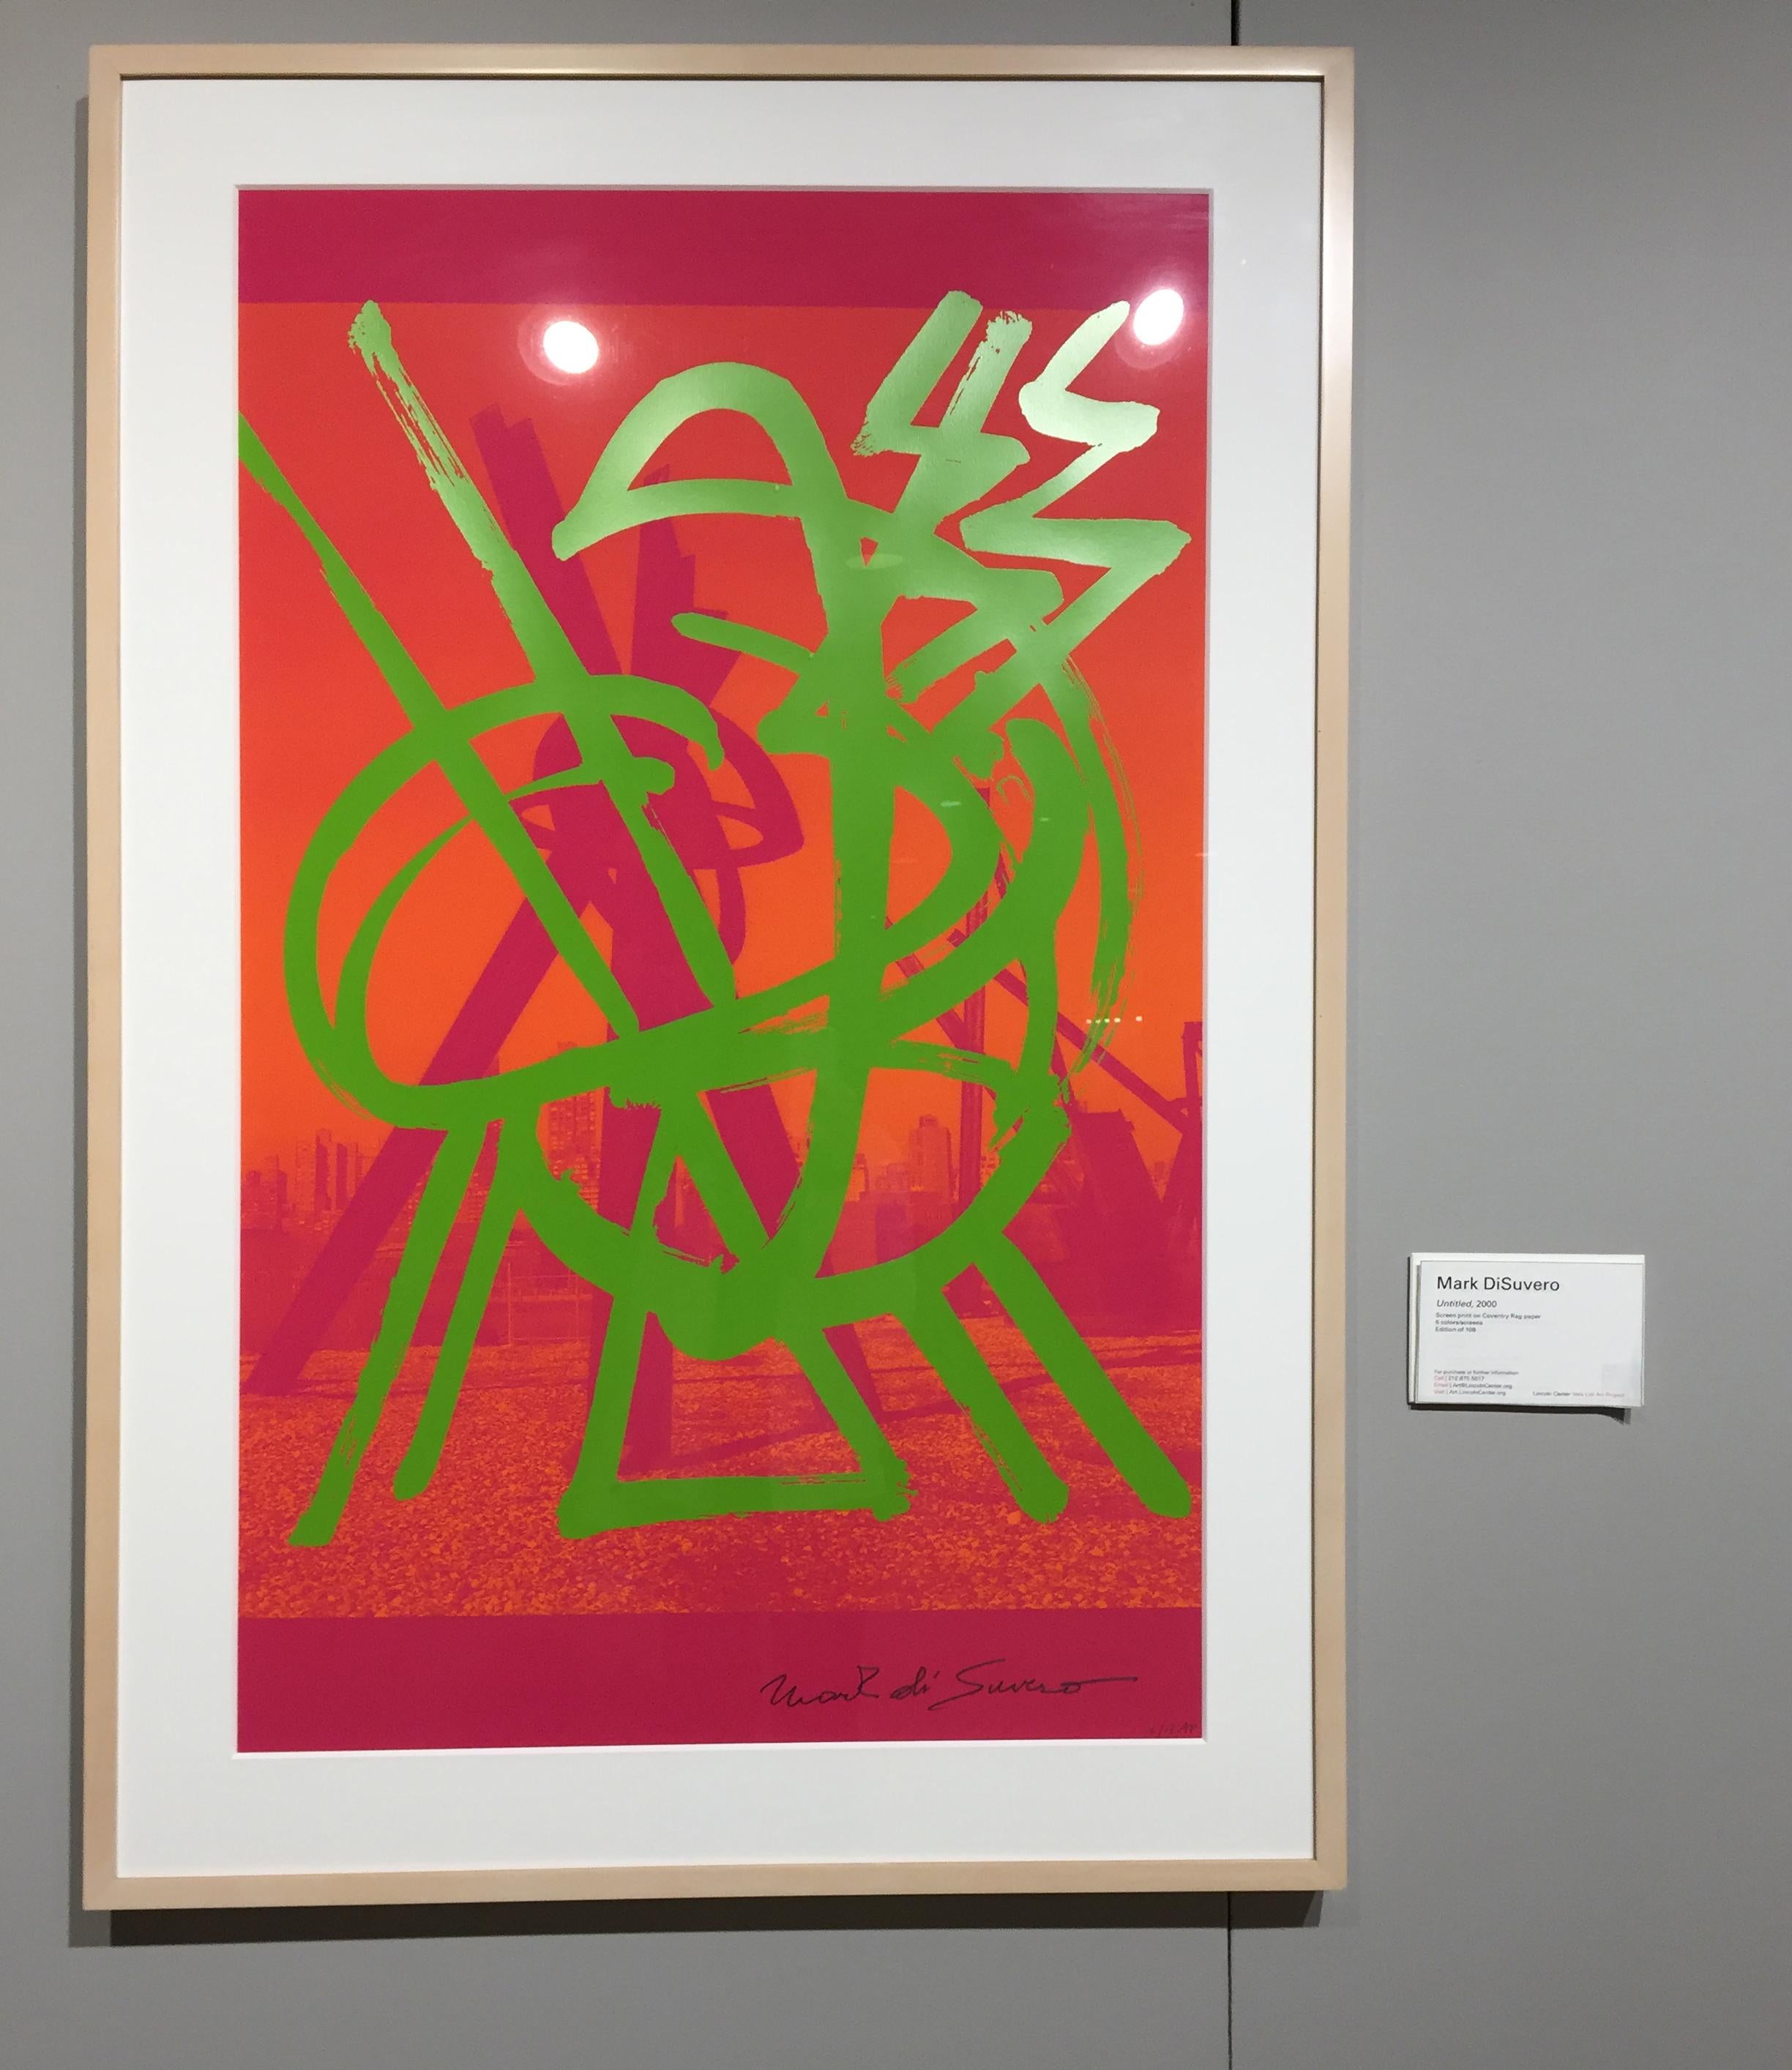 Untitled, 2000, by Mark di Suvero (pink and orange abstract) im Angebot 1